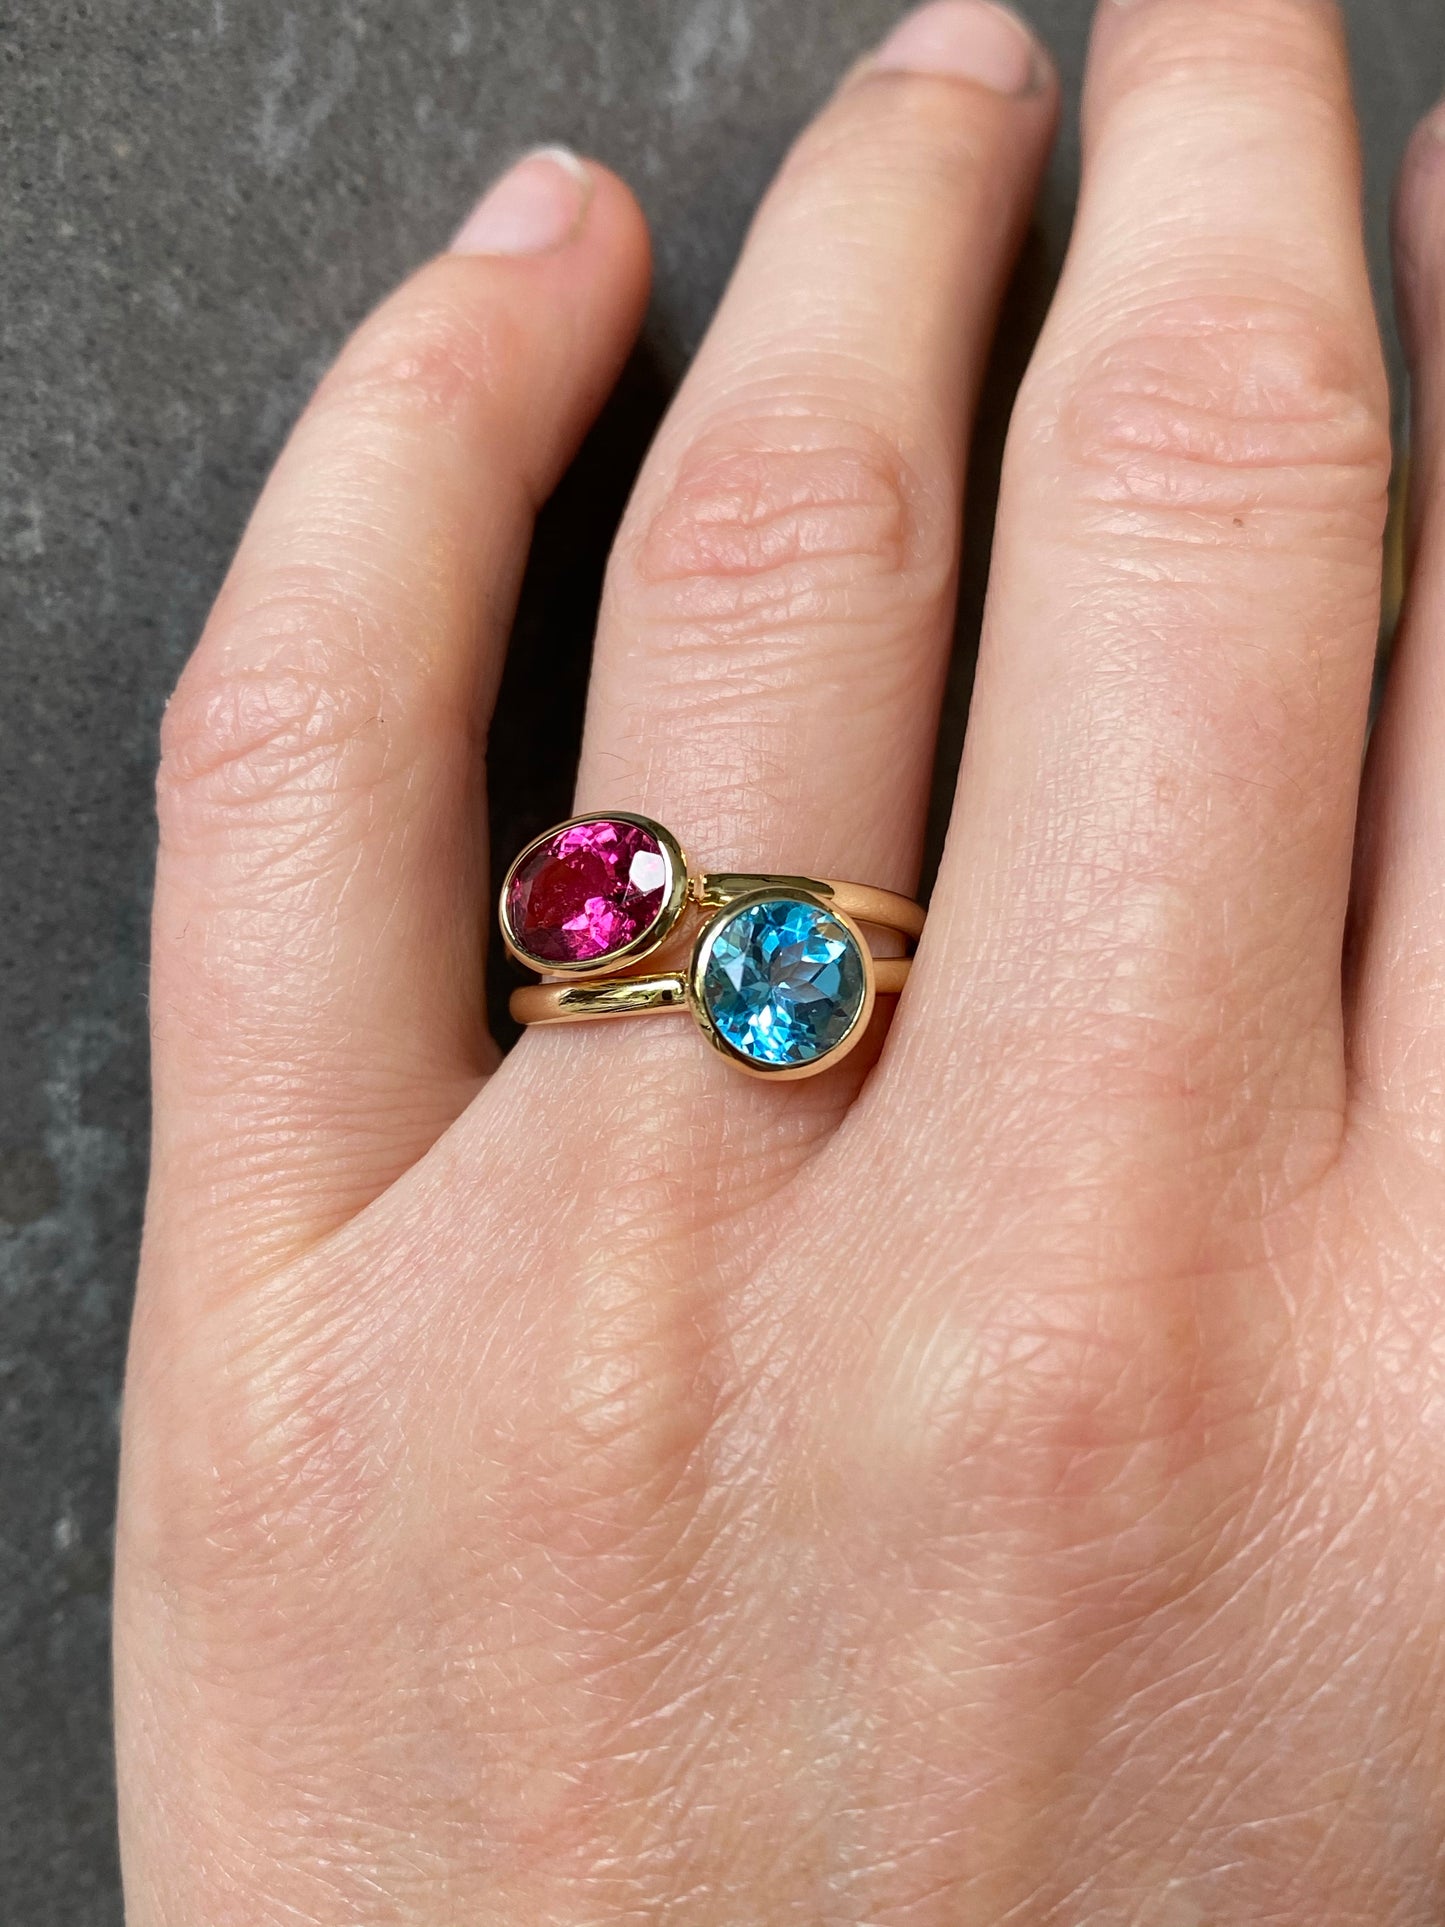 14k yellow gold ring set with a Pink Tourmaline